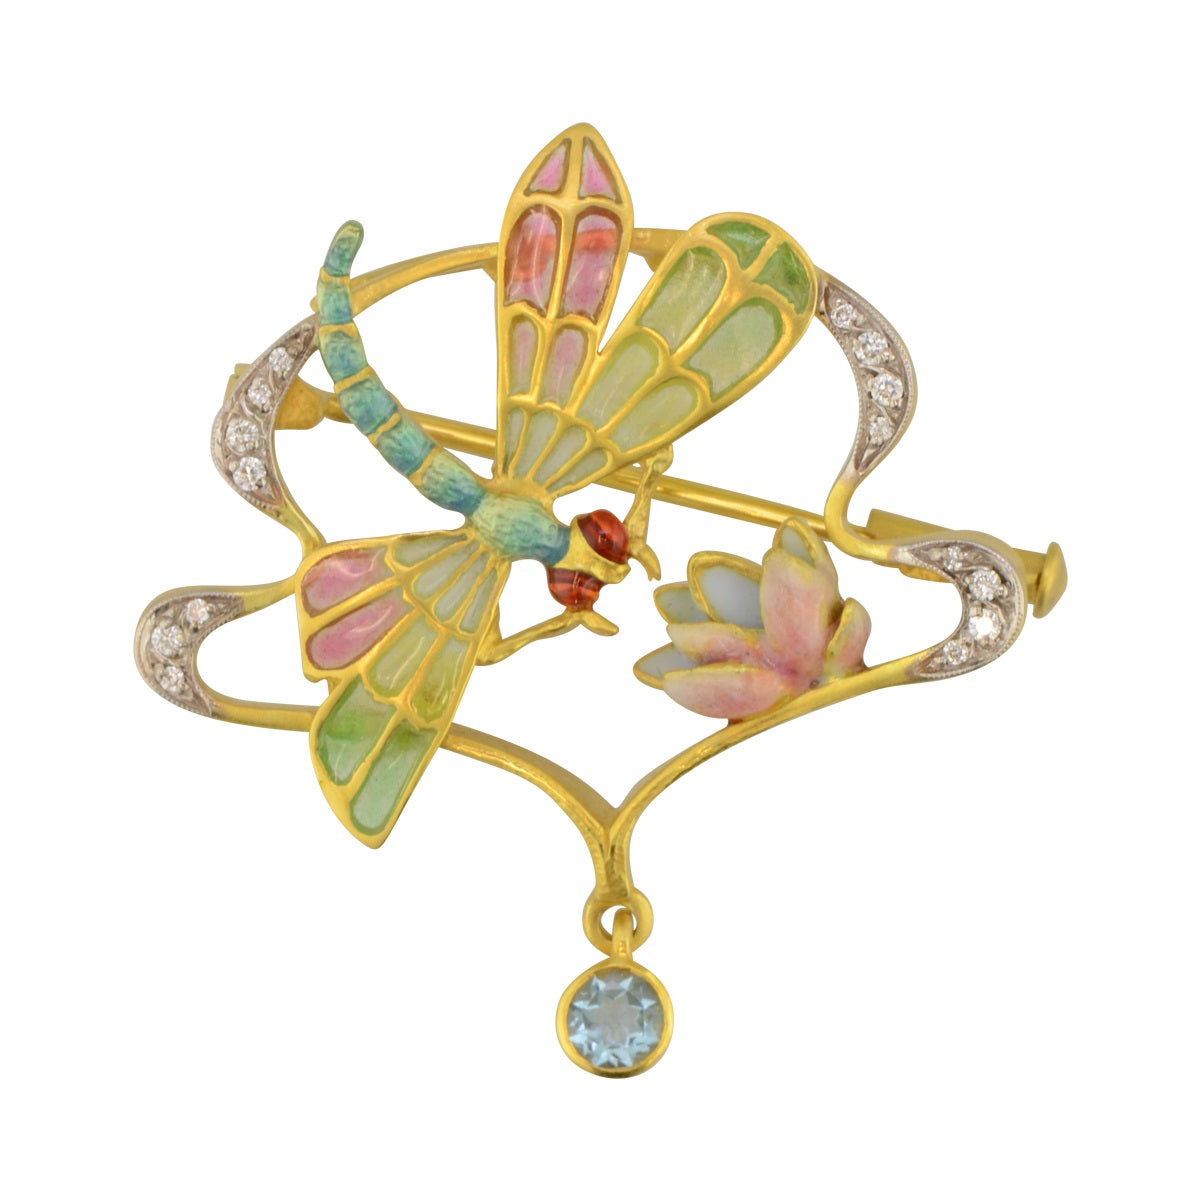 Dragonfly and Lotus Brooch